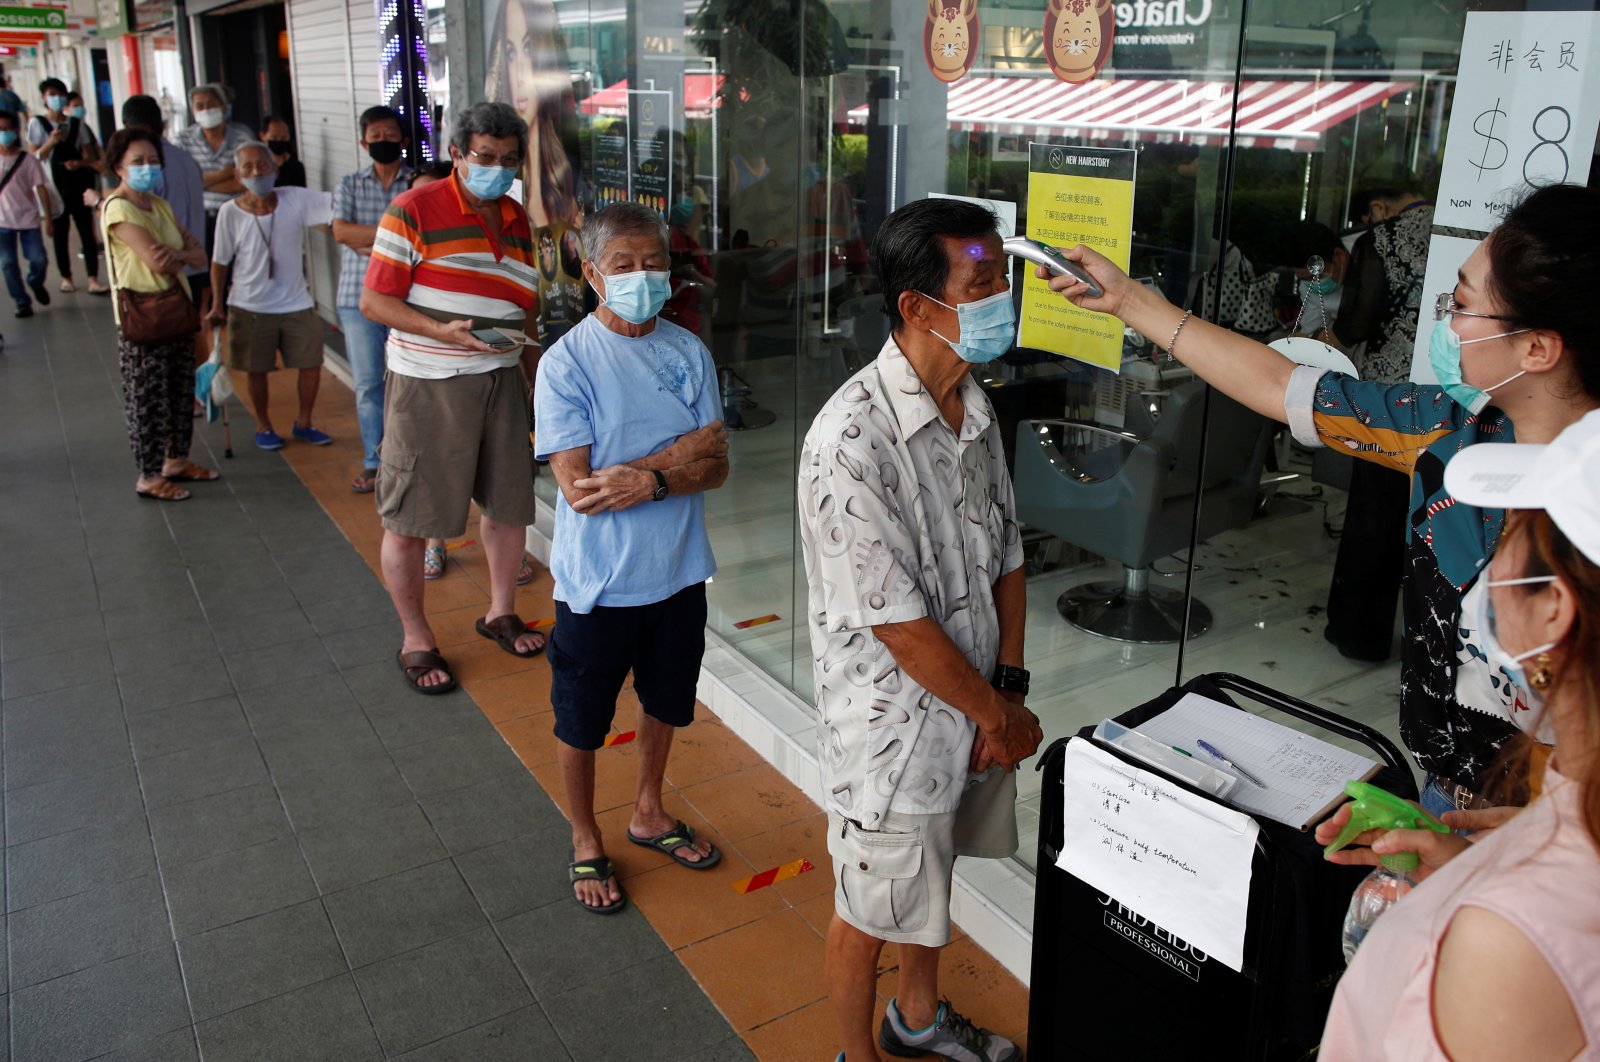 Customers queue up to have their temperature taken outside a hairdressing salon as they reopen for business amid the coronavirus disease (COVID-19) outbreak in Singapore May 12, 2020. (Reuters Photo)